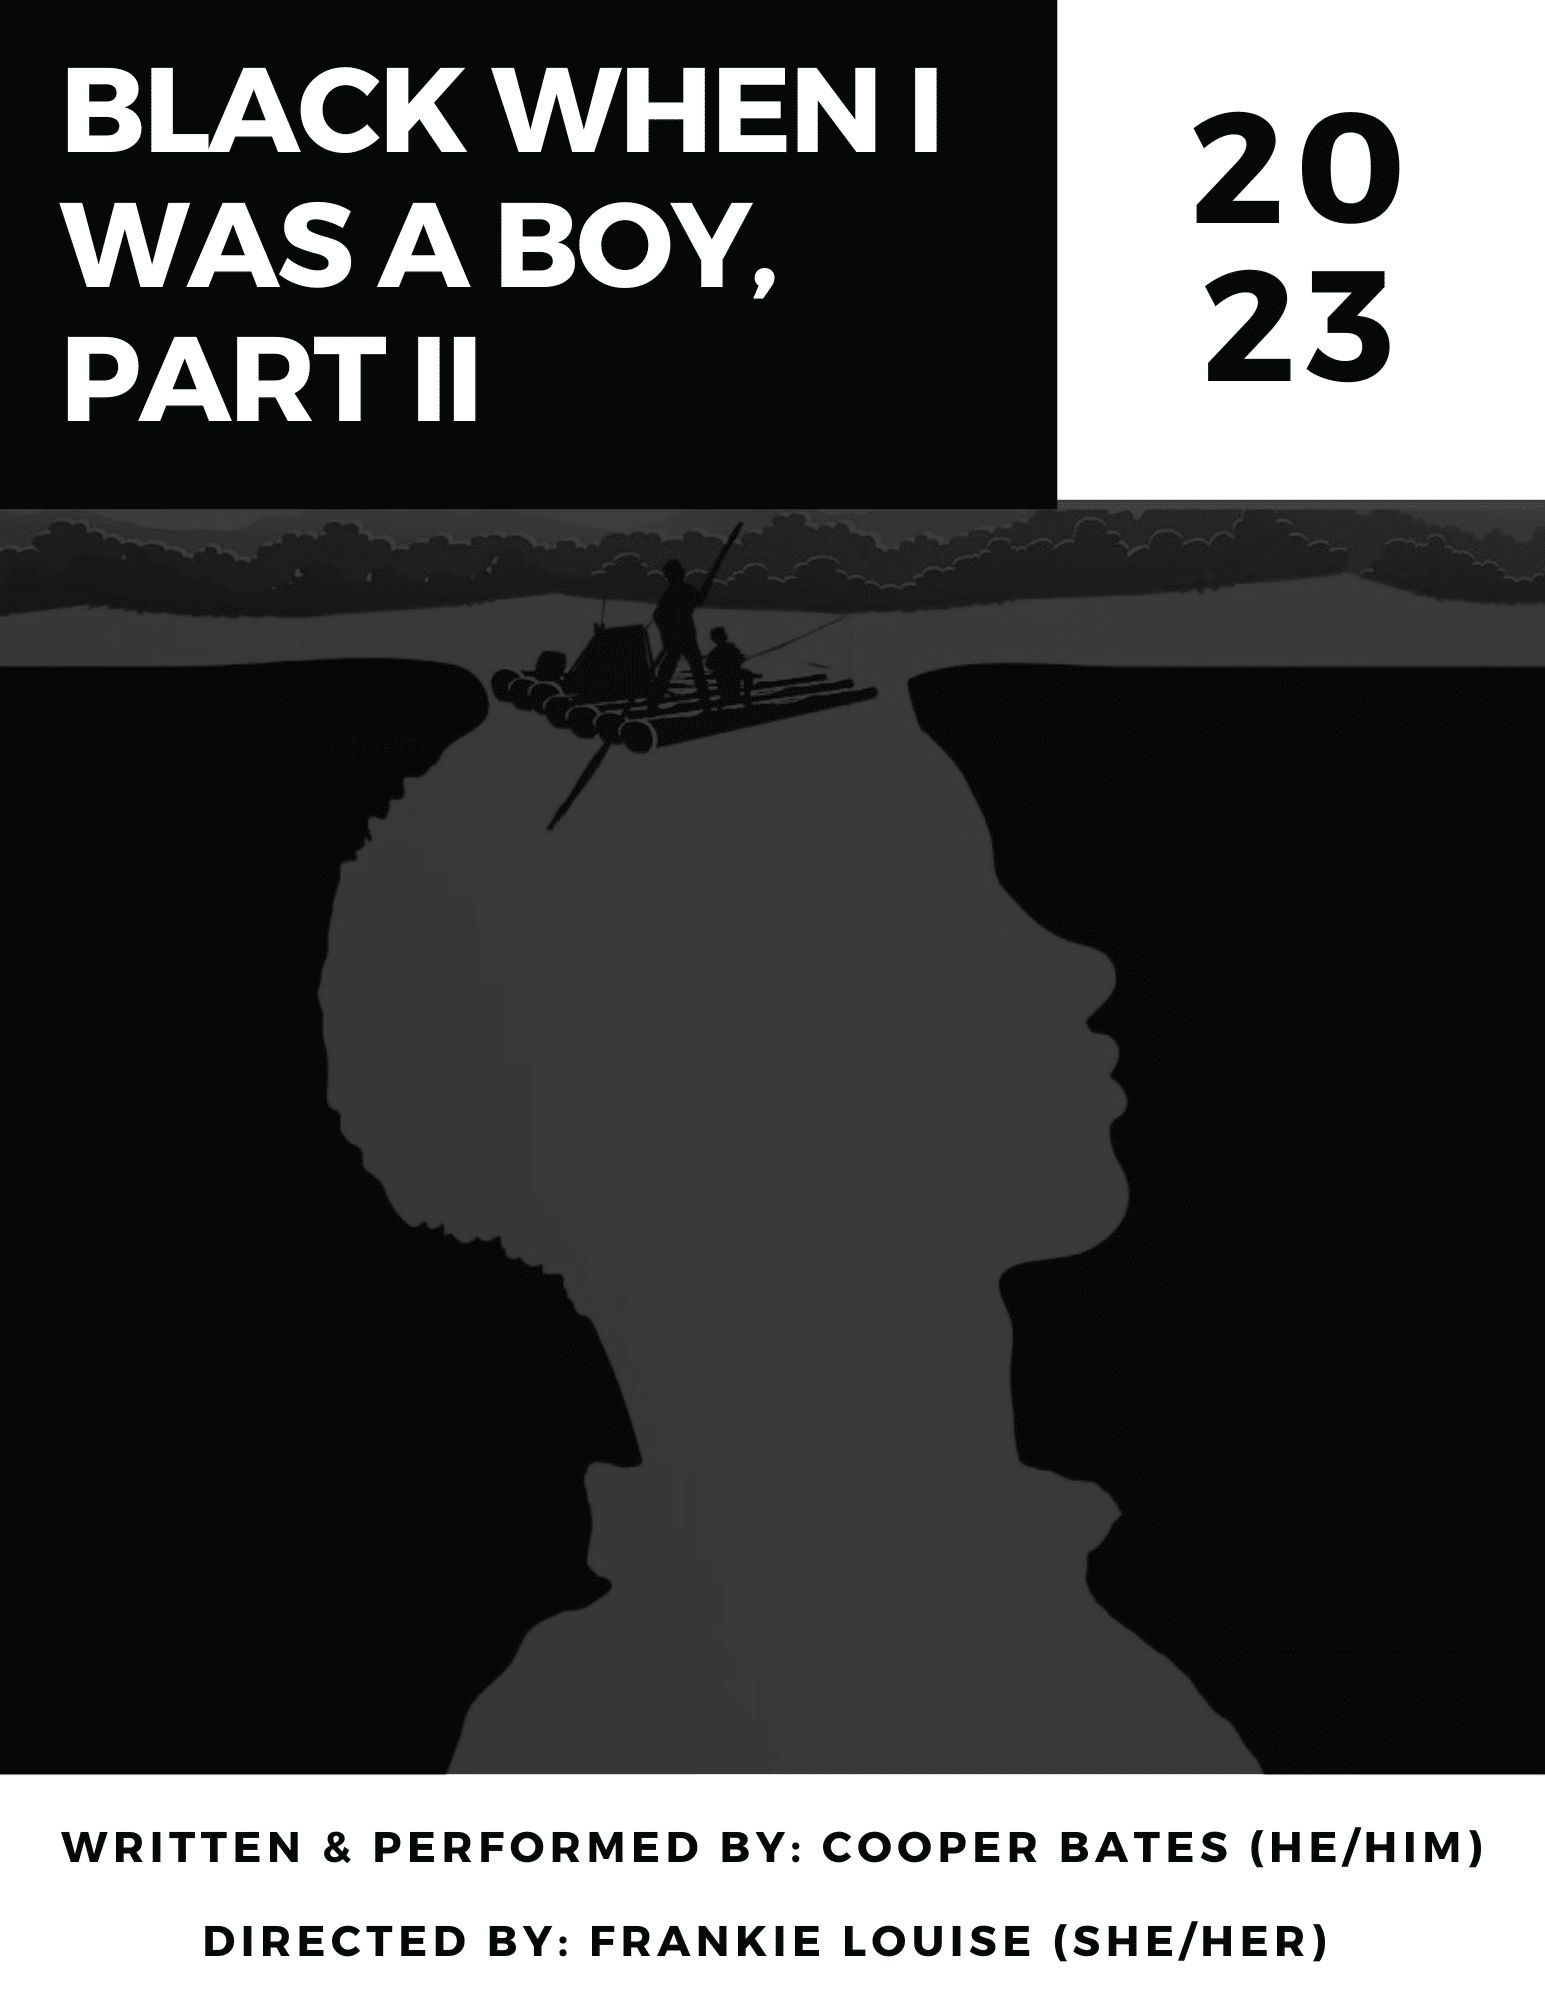 Cooper Bates Playbill - Cover Option #1 2